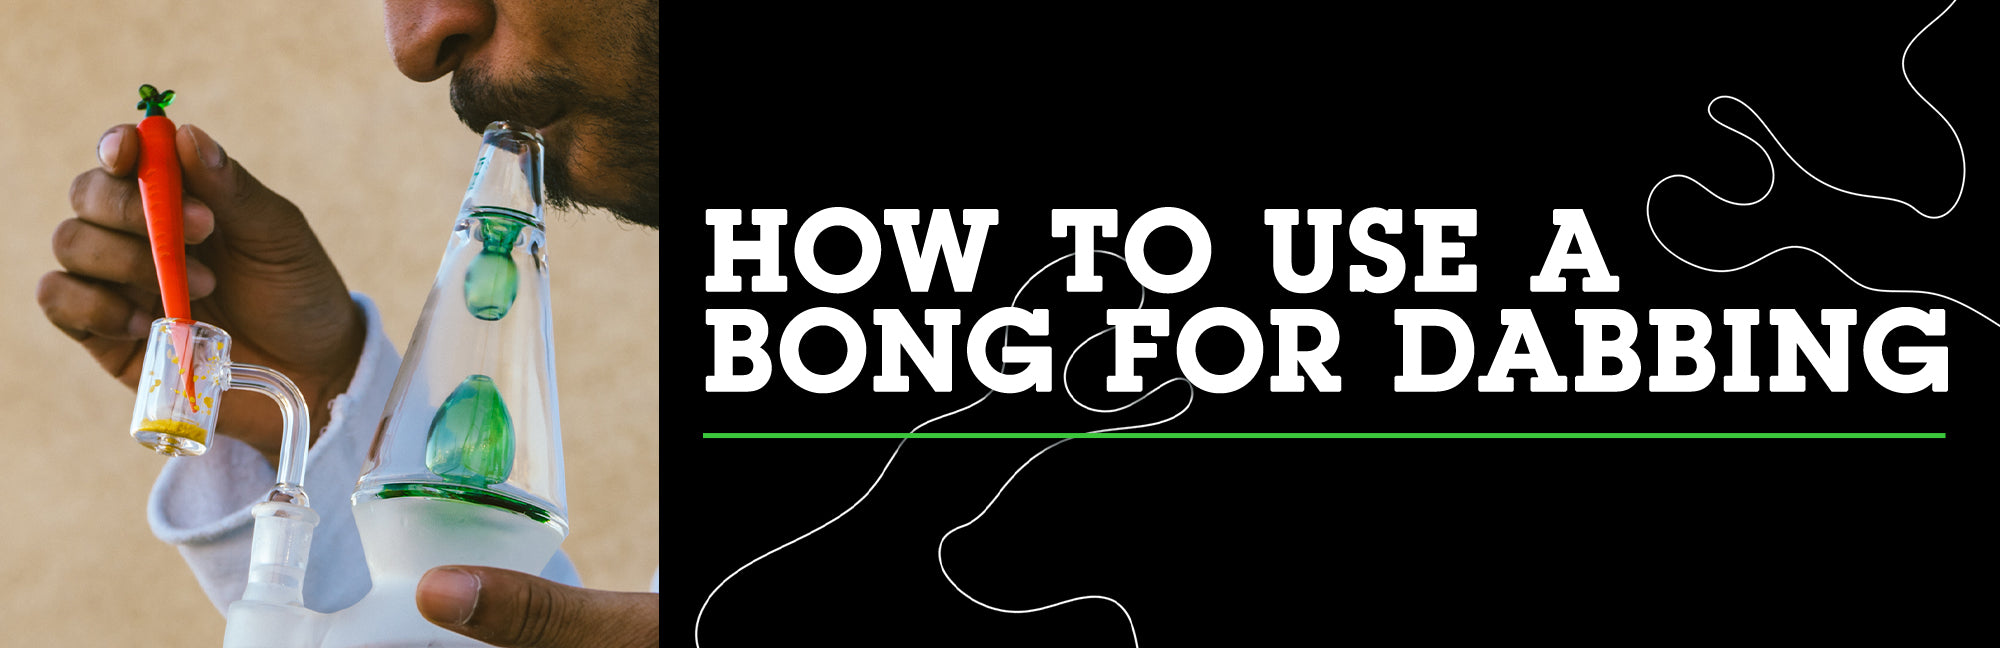 how-to-use-your-bong-for-dabbing